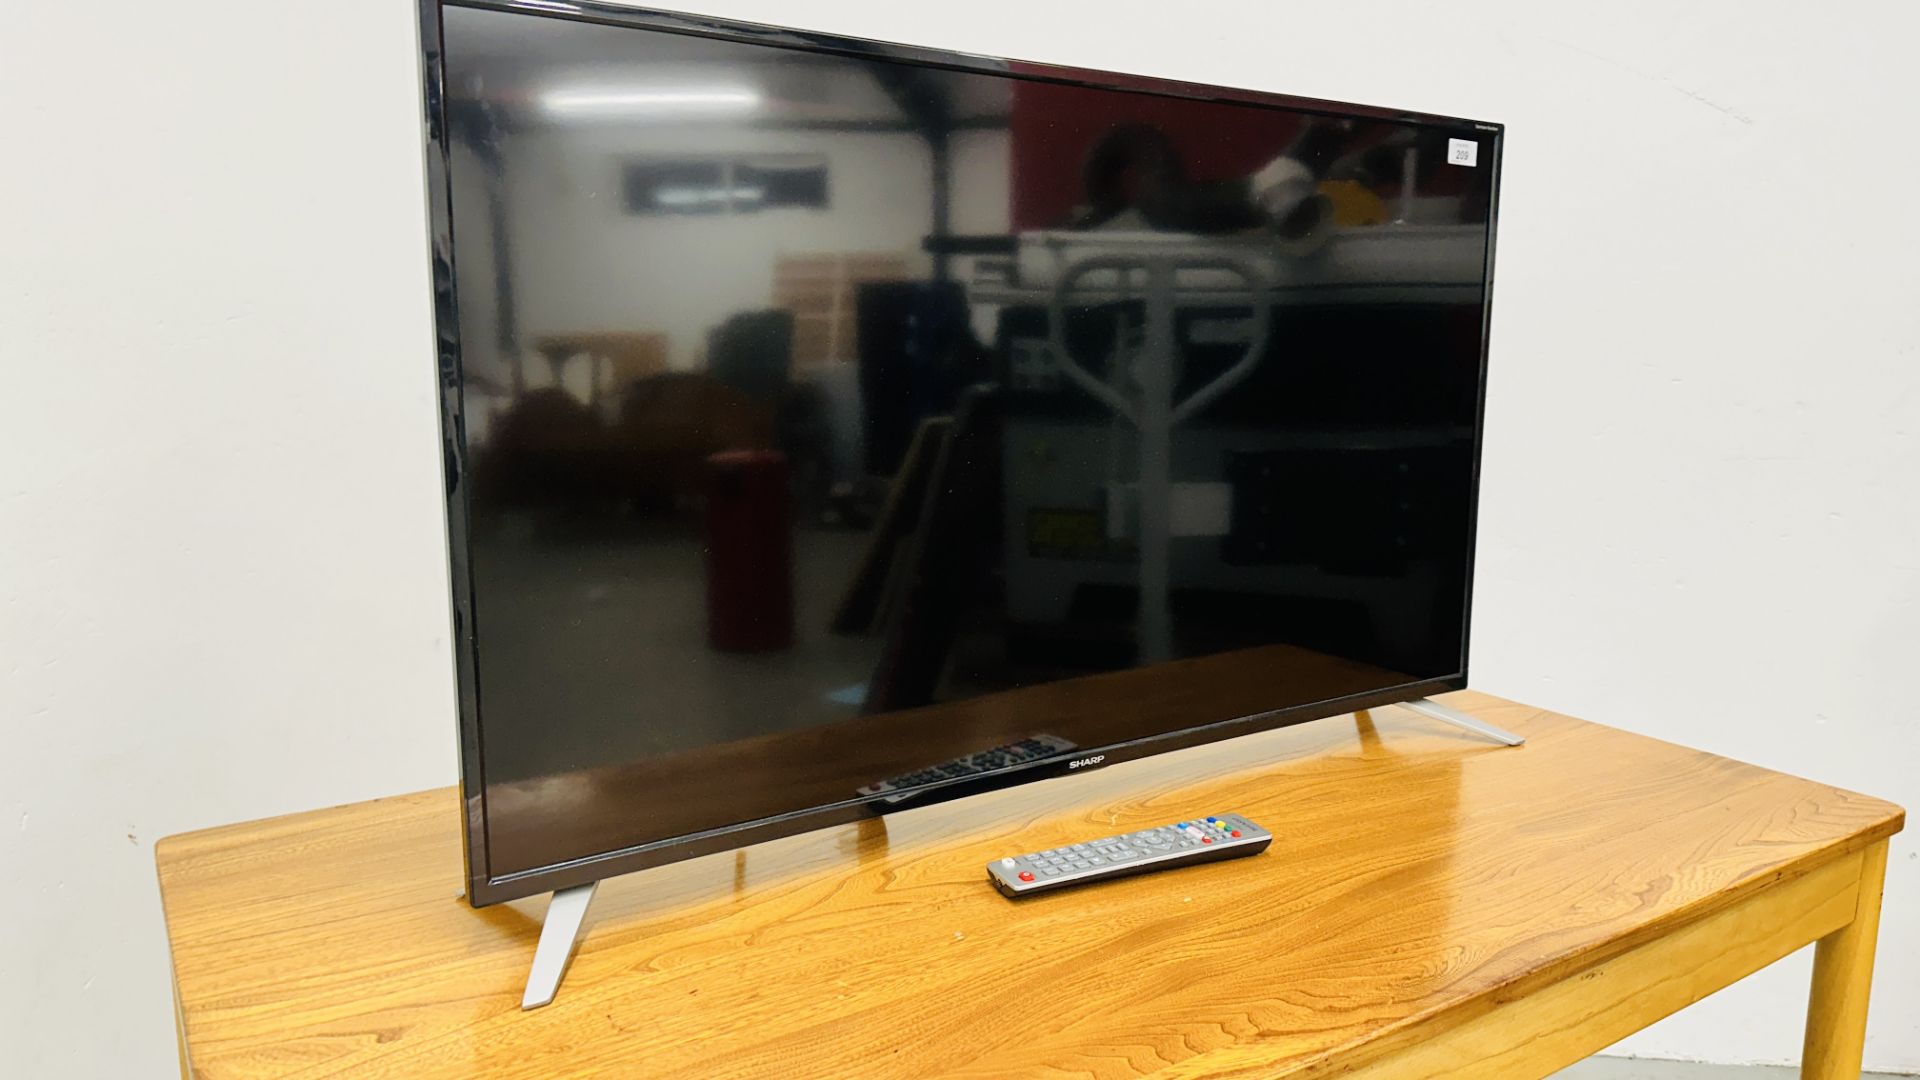 SHARP 42" FLAT SCREEN TV WITH REMOTE - SOLD AS SEEN. - Image 2 of 5